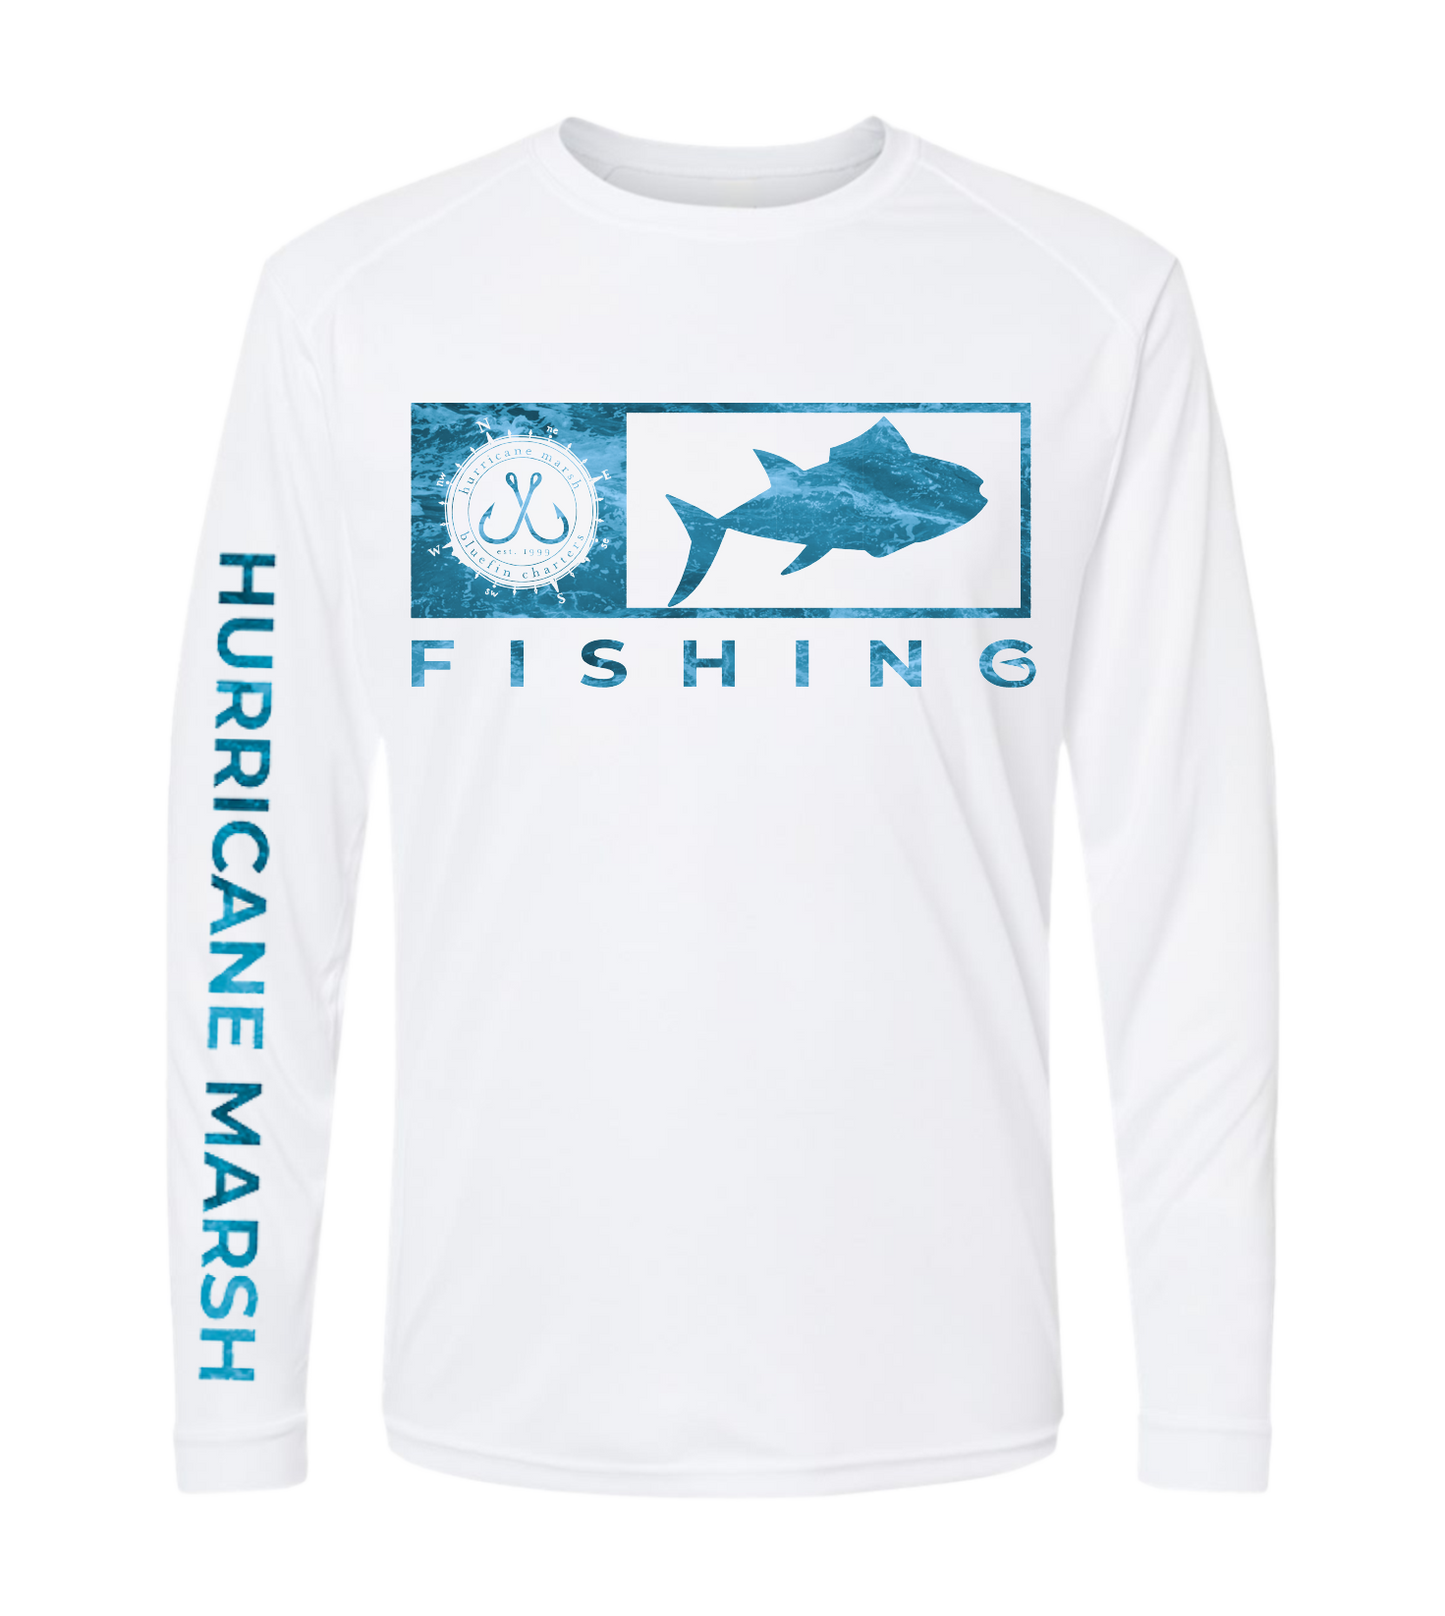 Fishing Collection – Hurricane Marsh Outfitters